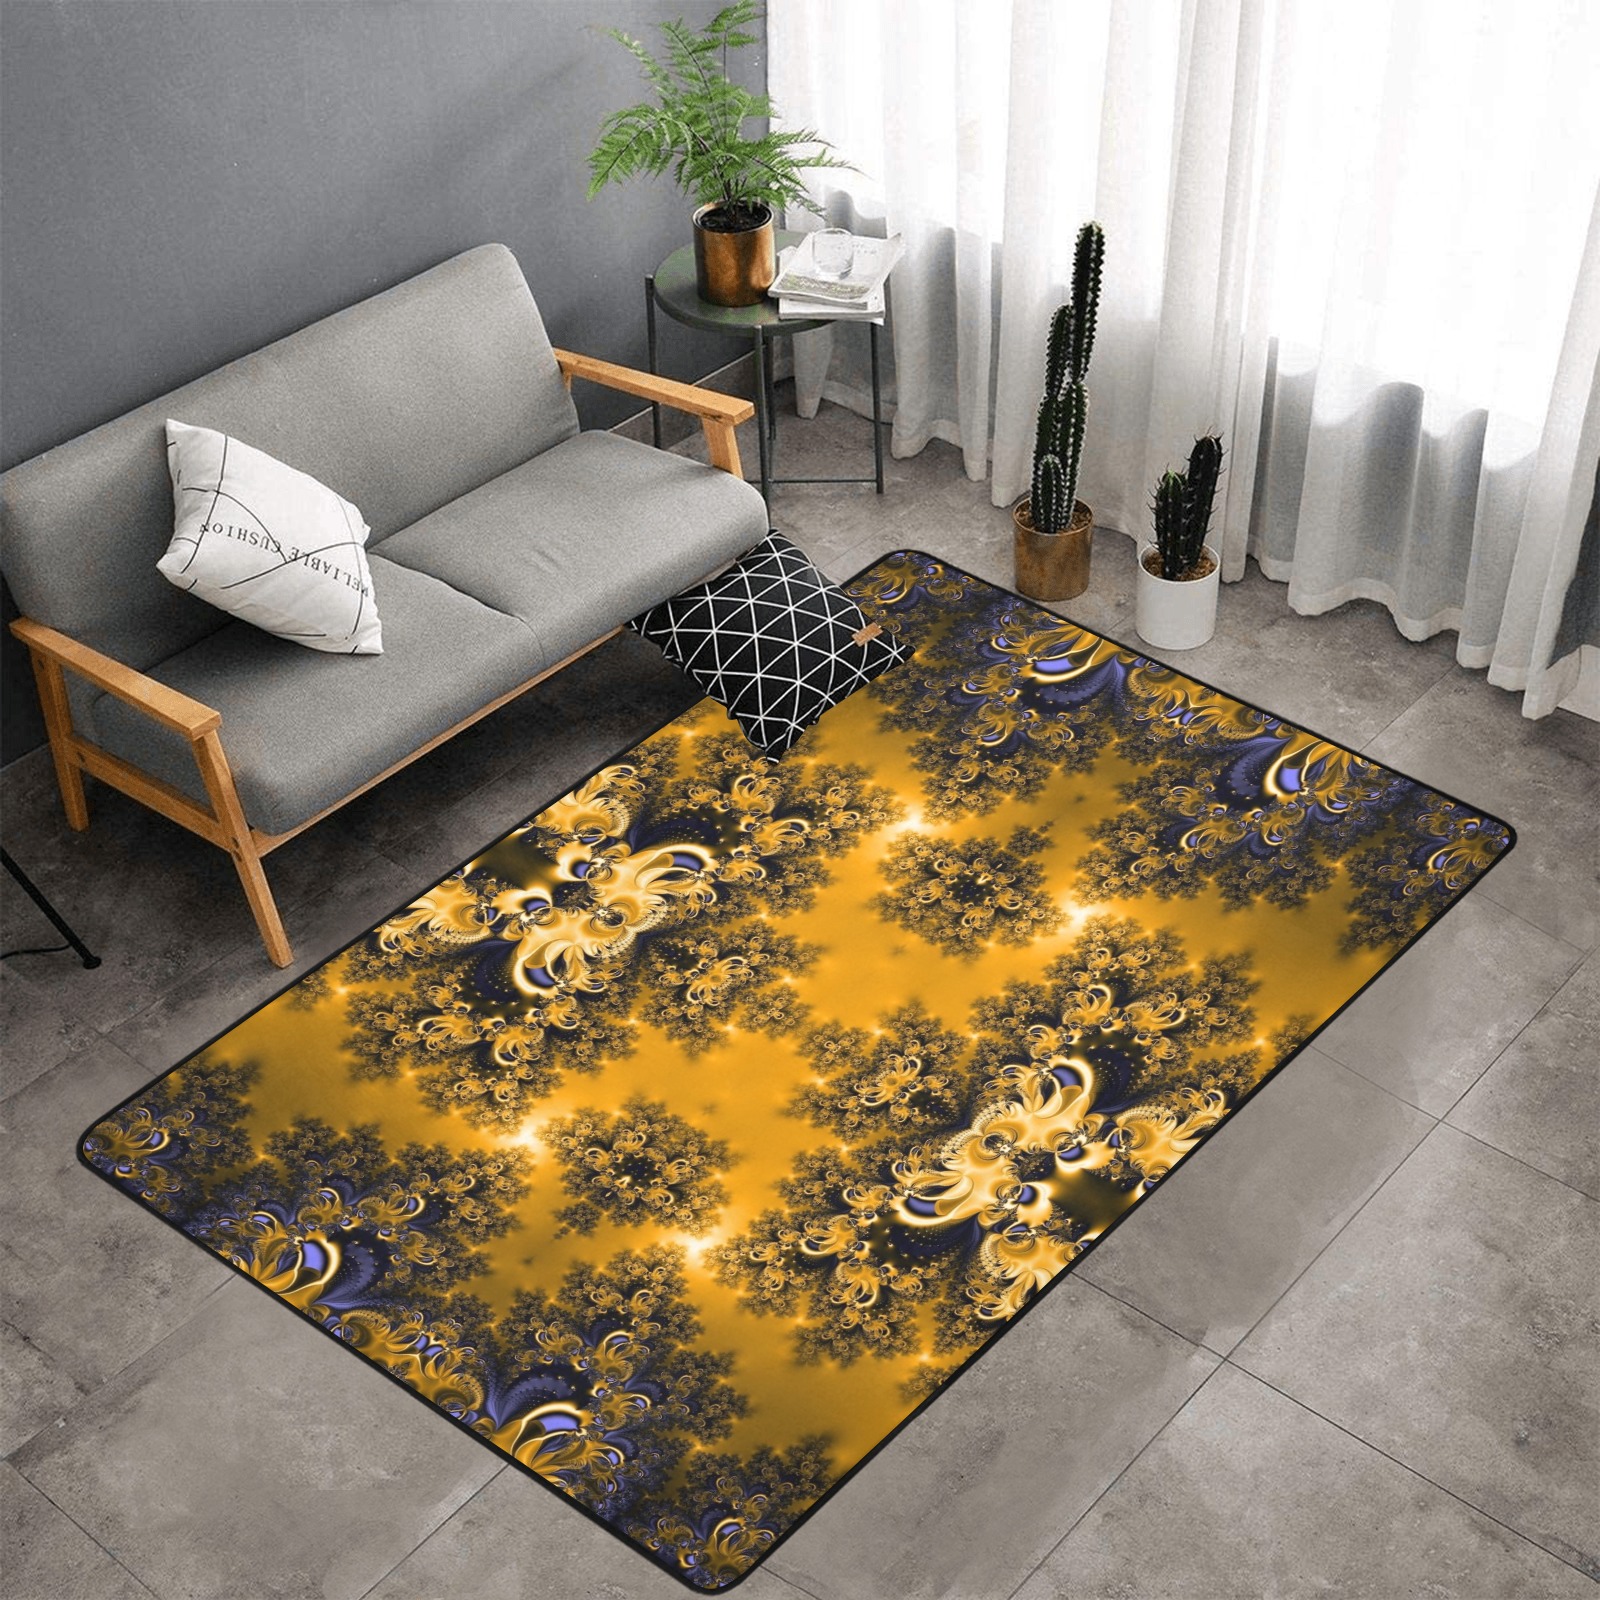 Golden Sun through the Trees Frost Fractal Area Rug with Black Binding 7'x5'